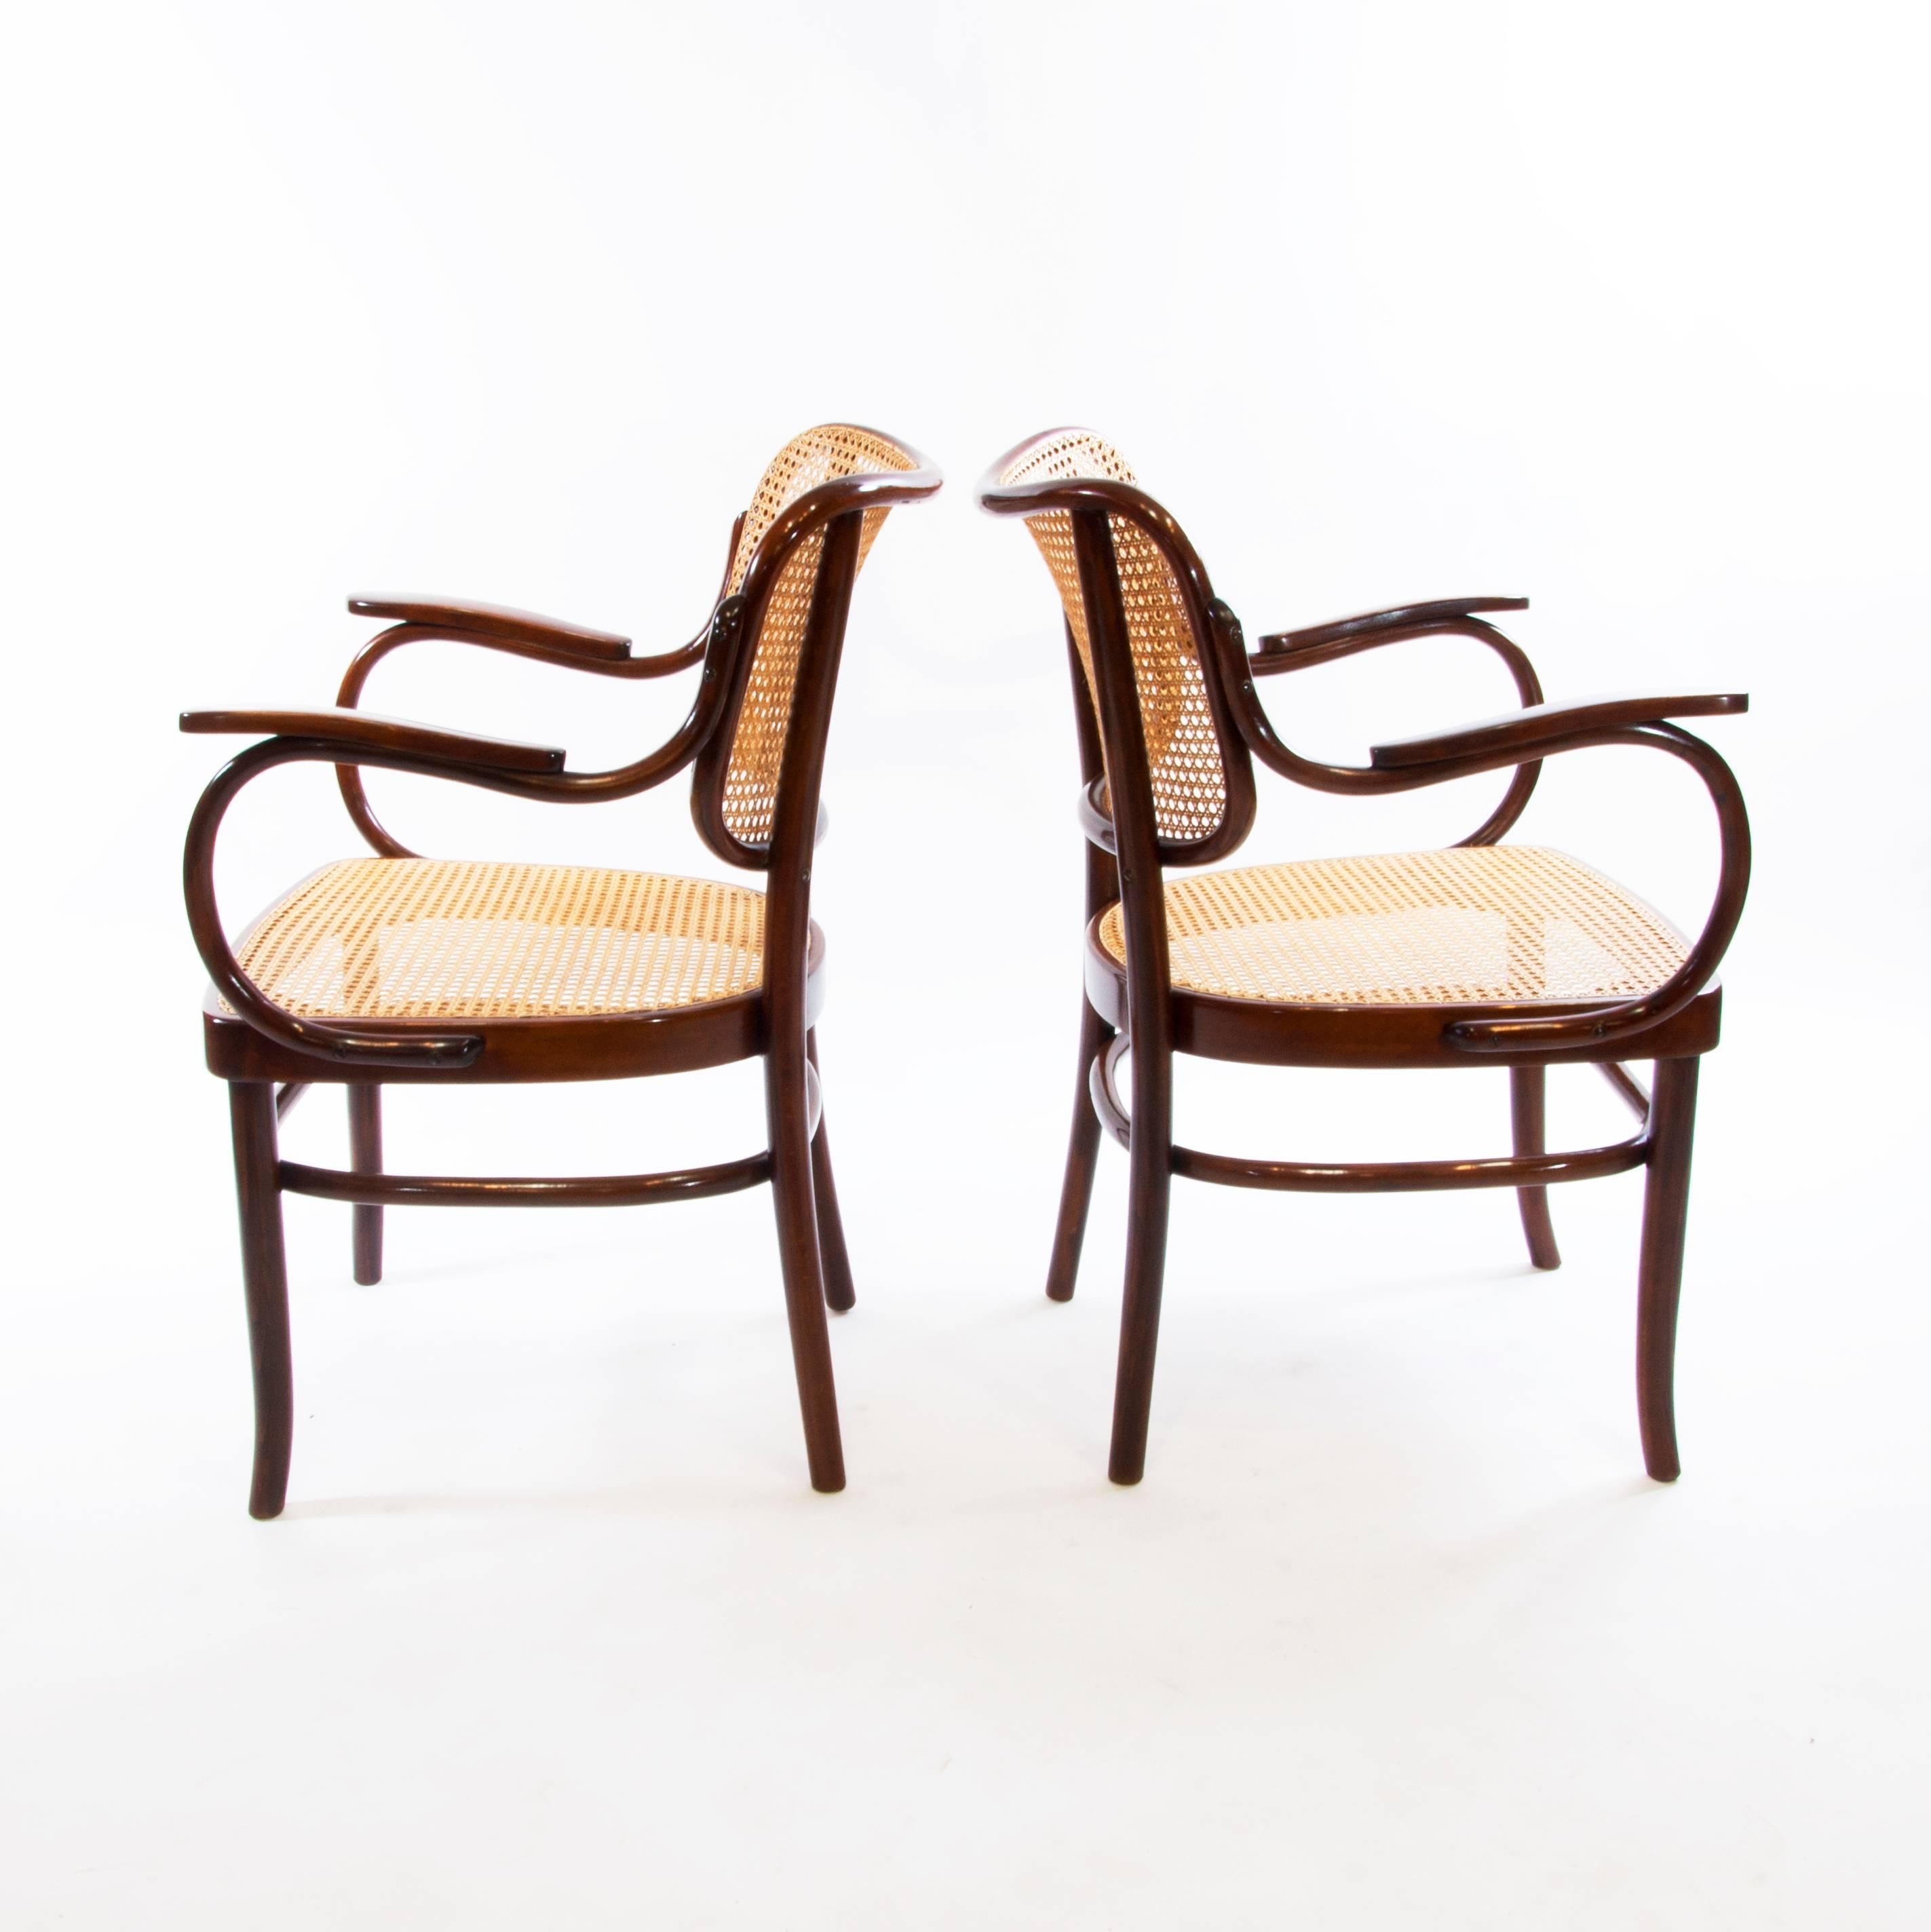 A wonderful pair of design masterpieces. 
Elegance of the organic bentwood curves, warmth of the wickerwork seat and backrest and obpulent style of the 1930s make these armchairs very iconic!
Gustav Schneck was Thonet's creative director and had